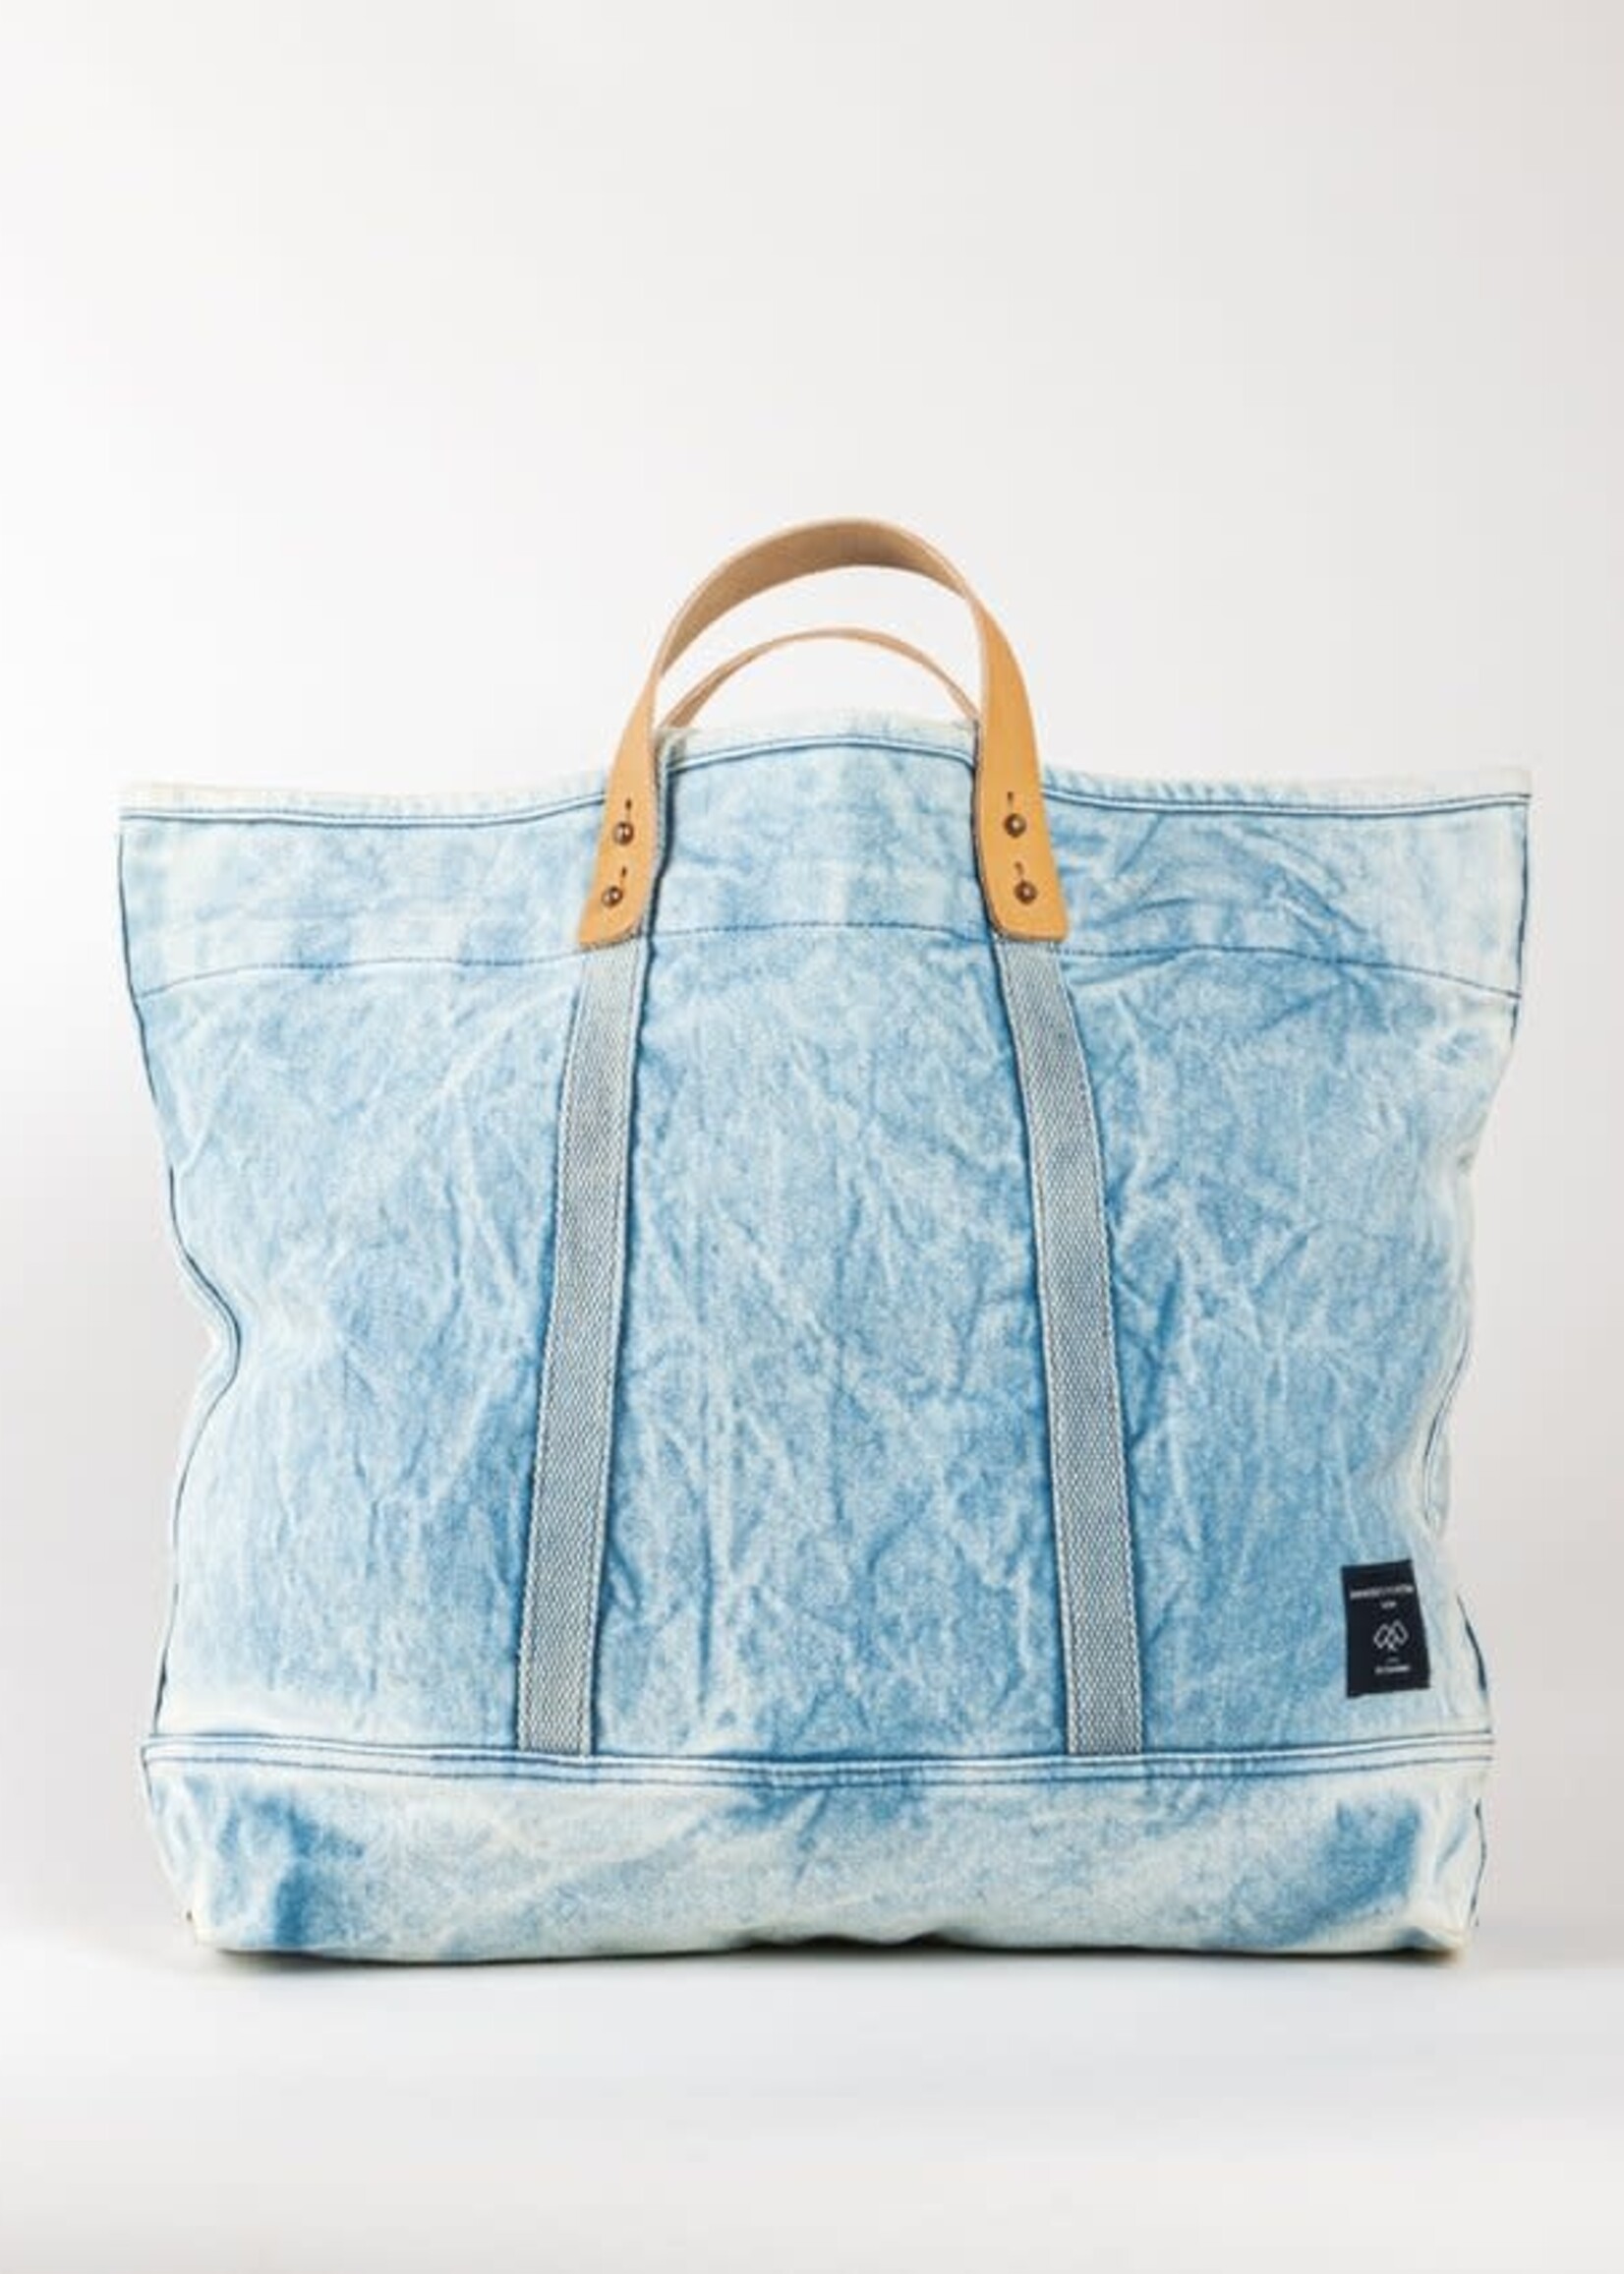 Shira Entis Large East West Tote